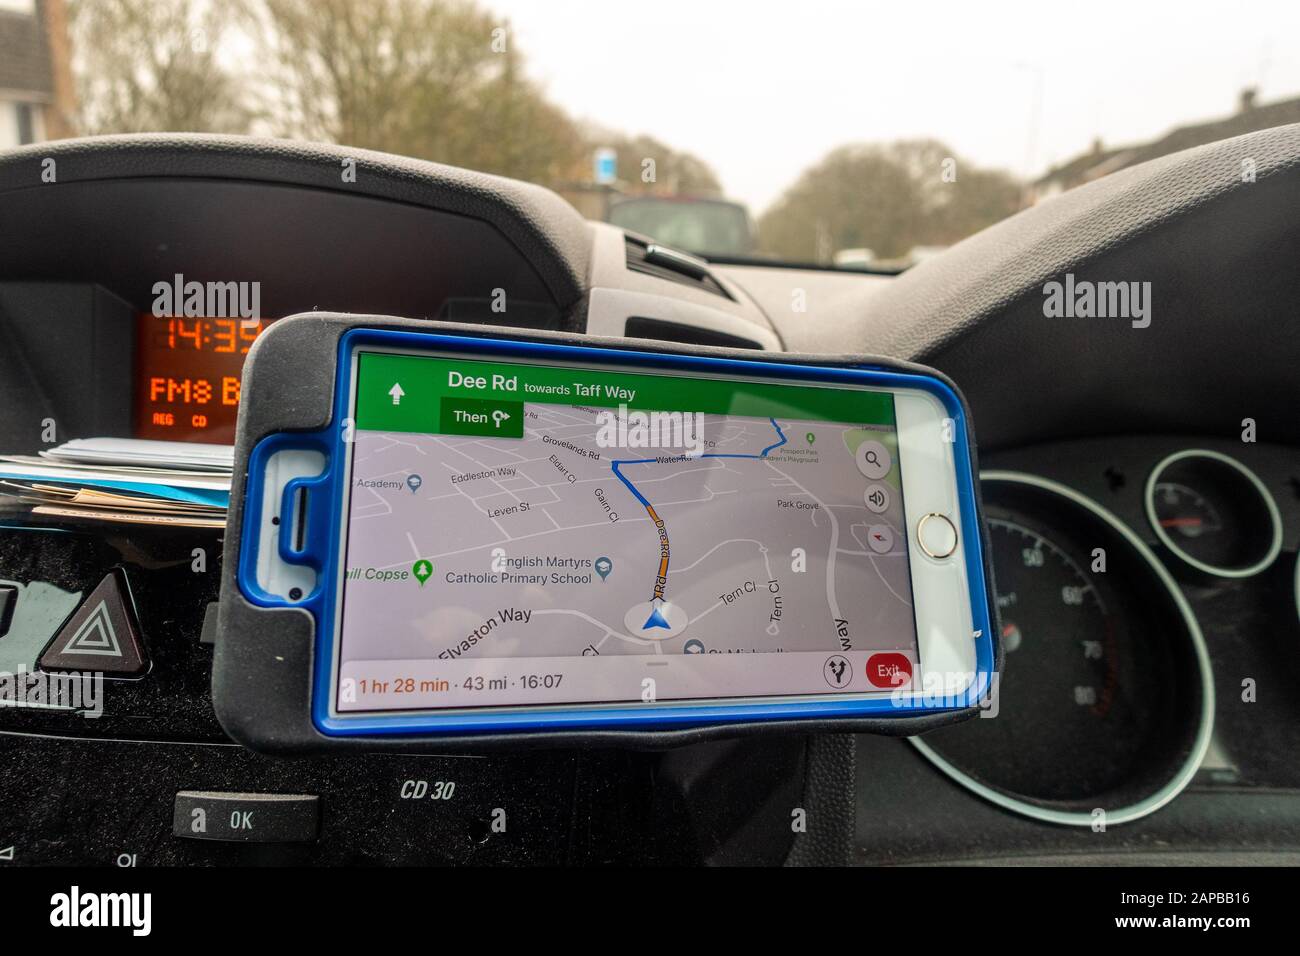 Google Maps app being used on an iPhone smartphone as a sat nav to  plan a route in a car. Stock Photo